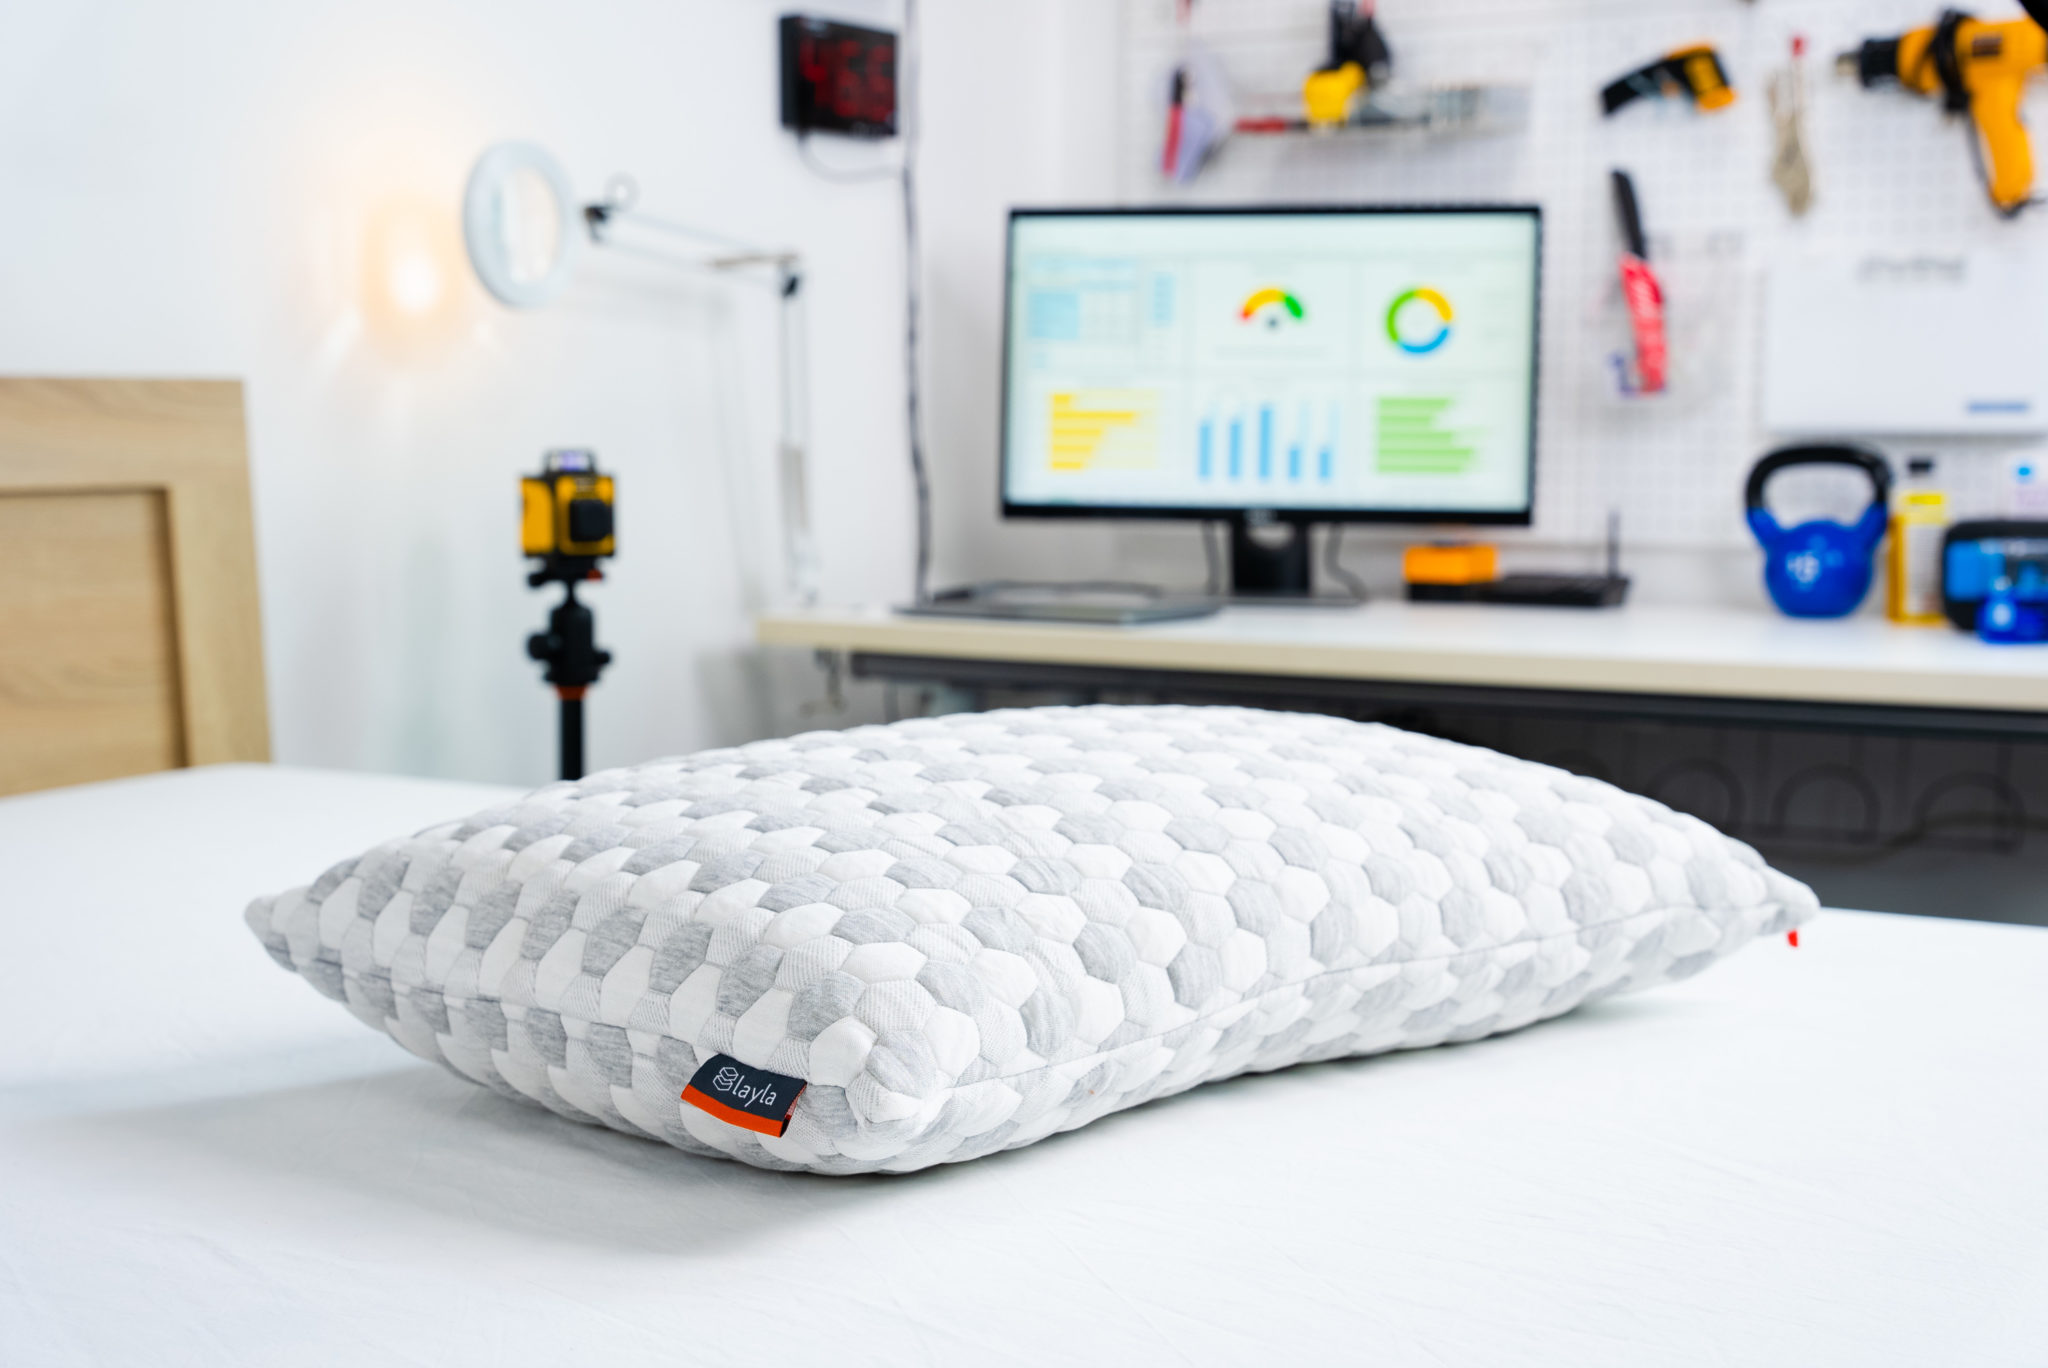 The Best Cooling Pillows of 2022 Pillows That Stay Cold For Hot Sleepers